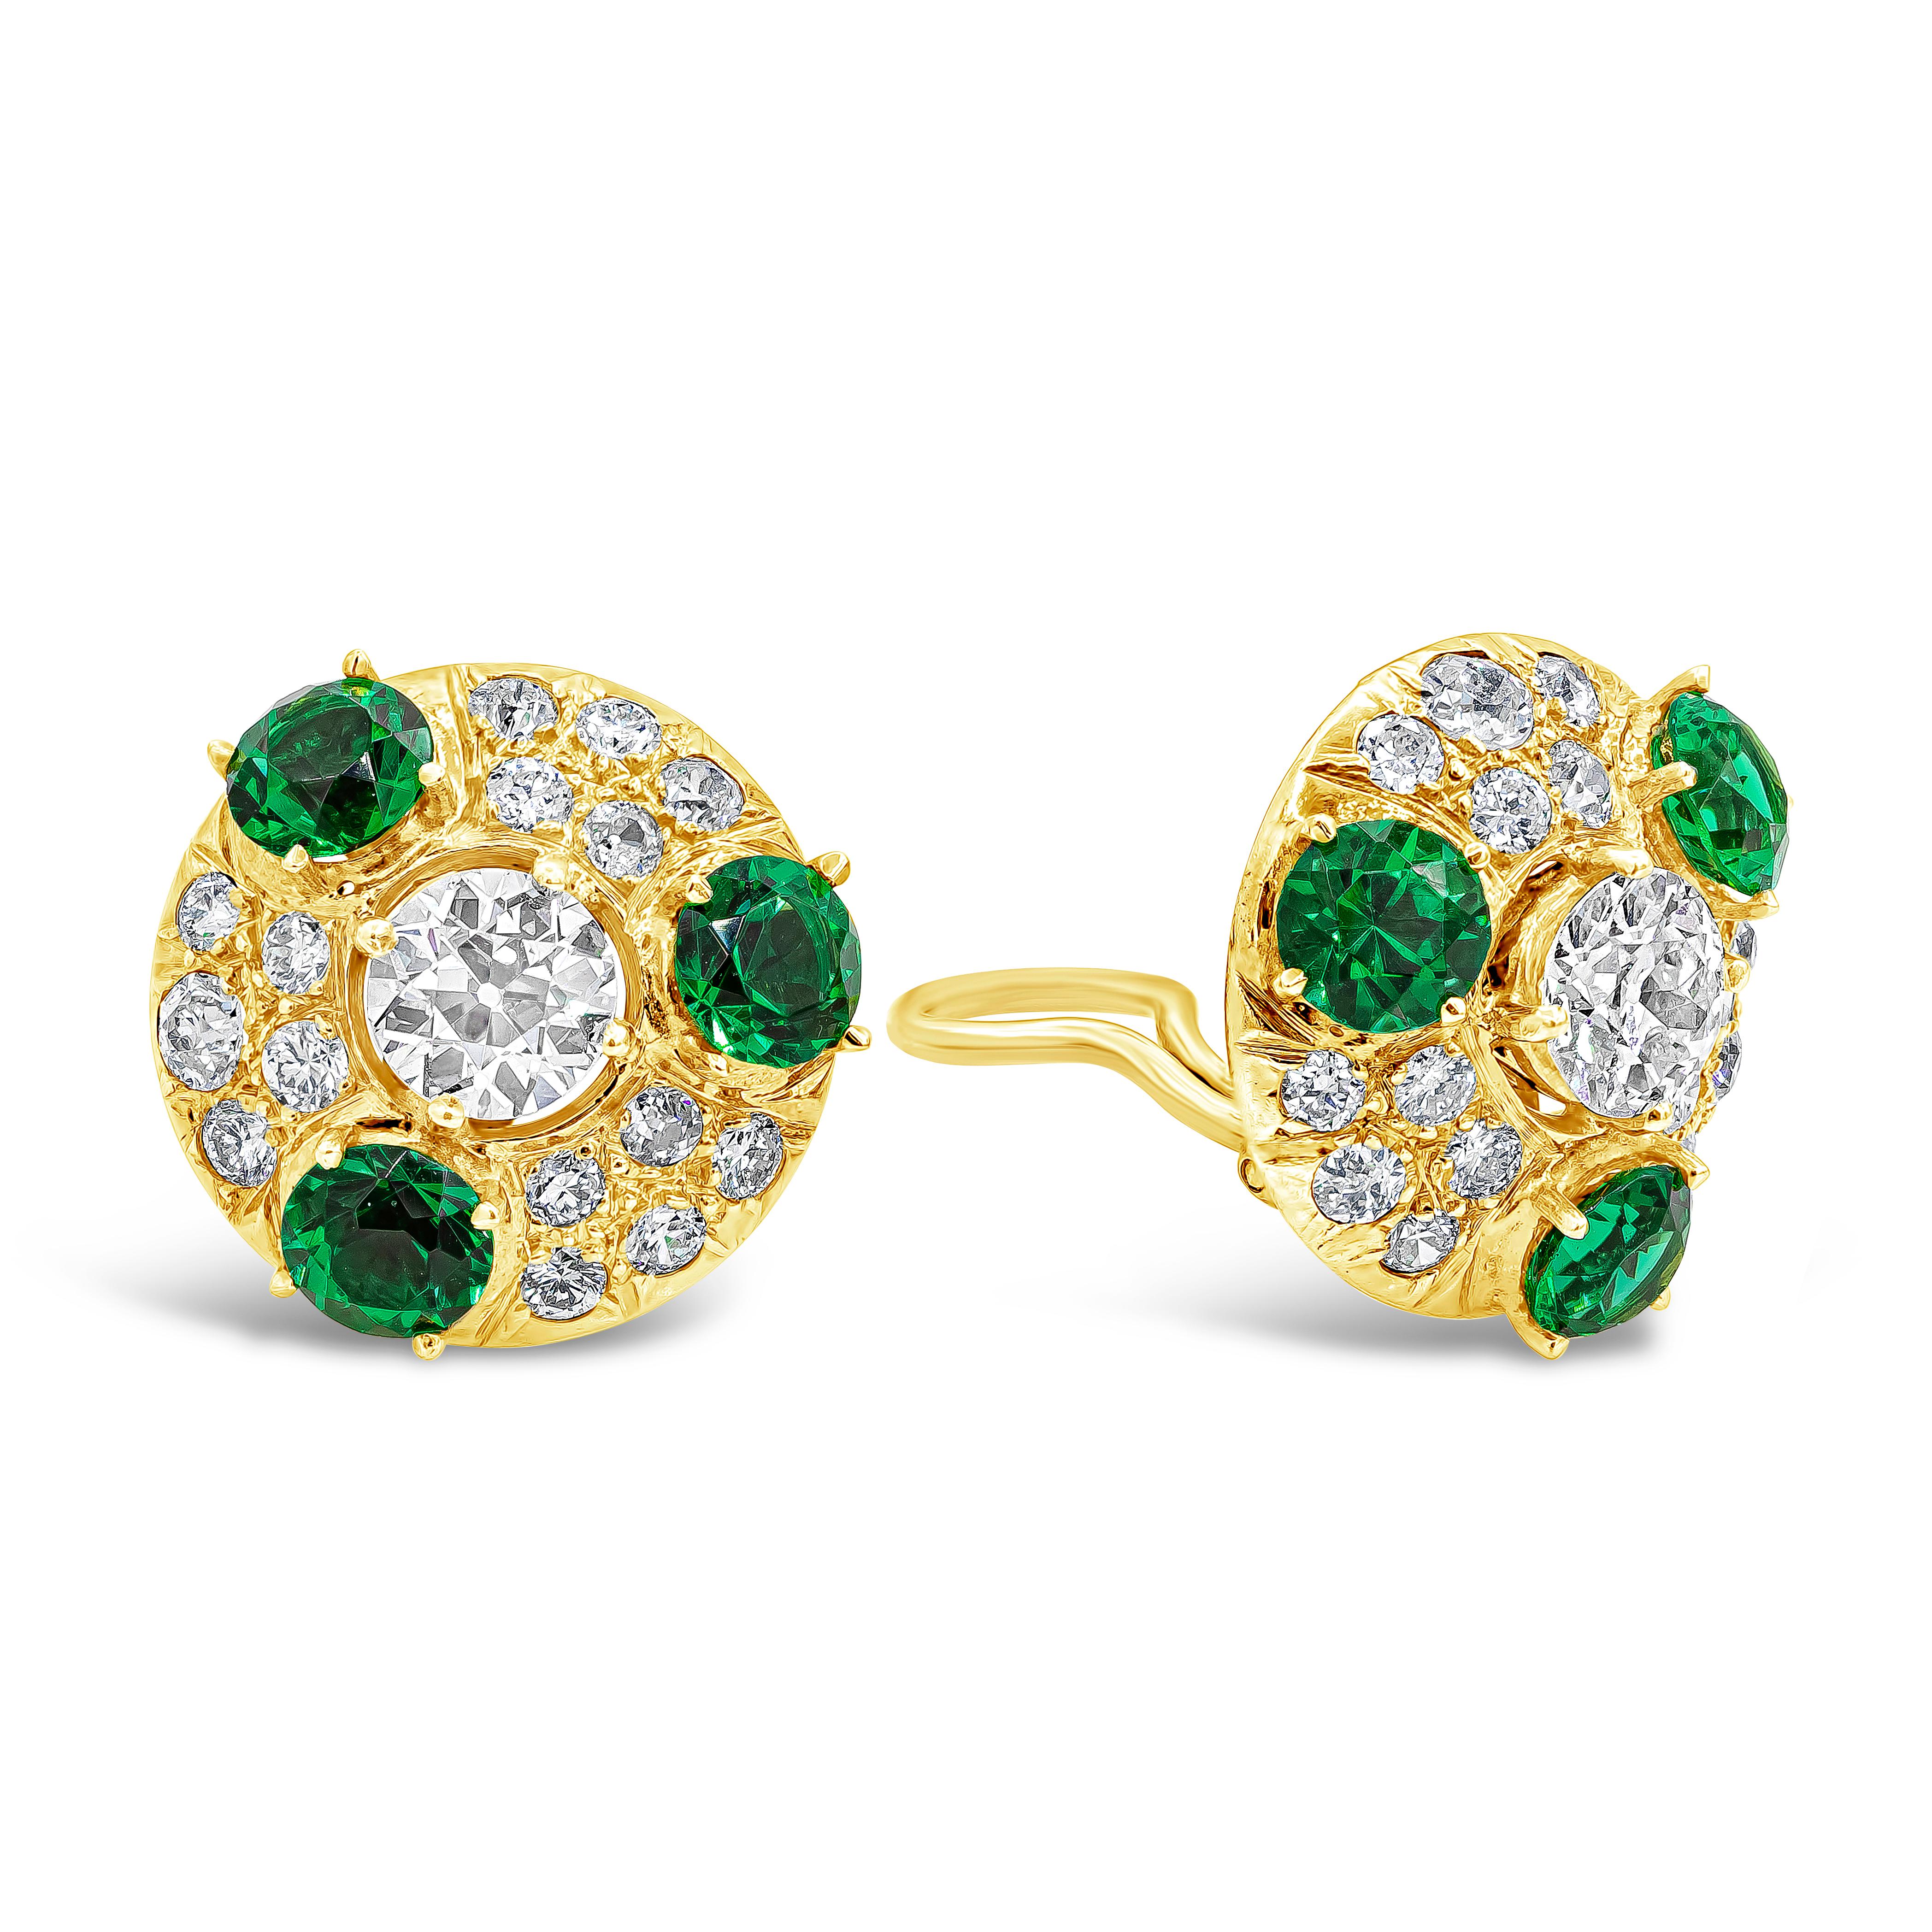 This simple but elegant clip on earrings showcasing two old european cut center stone weighing 1.80 carats total. Accented by smaller old european diamonds and three imitation green emeralds. Accent diamonds weigh 1.35 carats total. Made in 18K